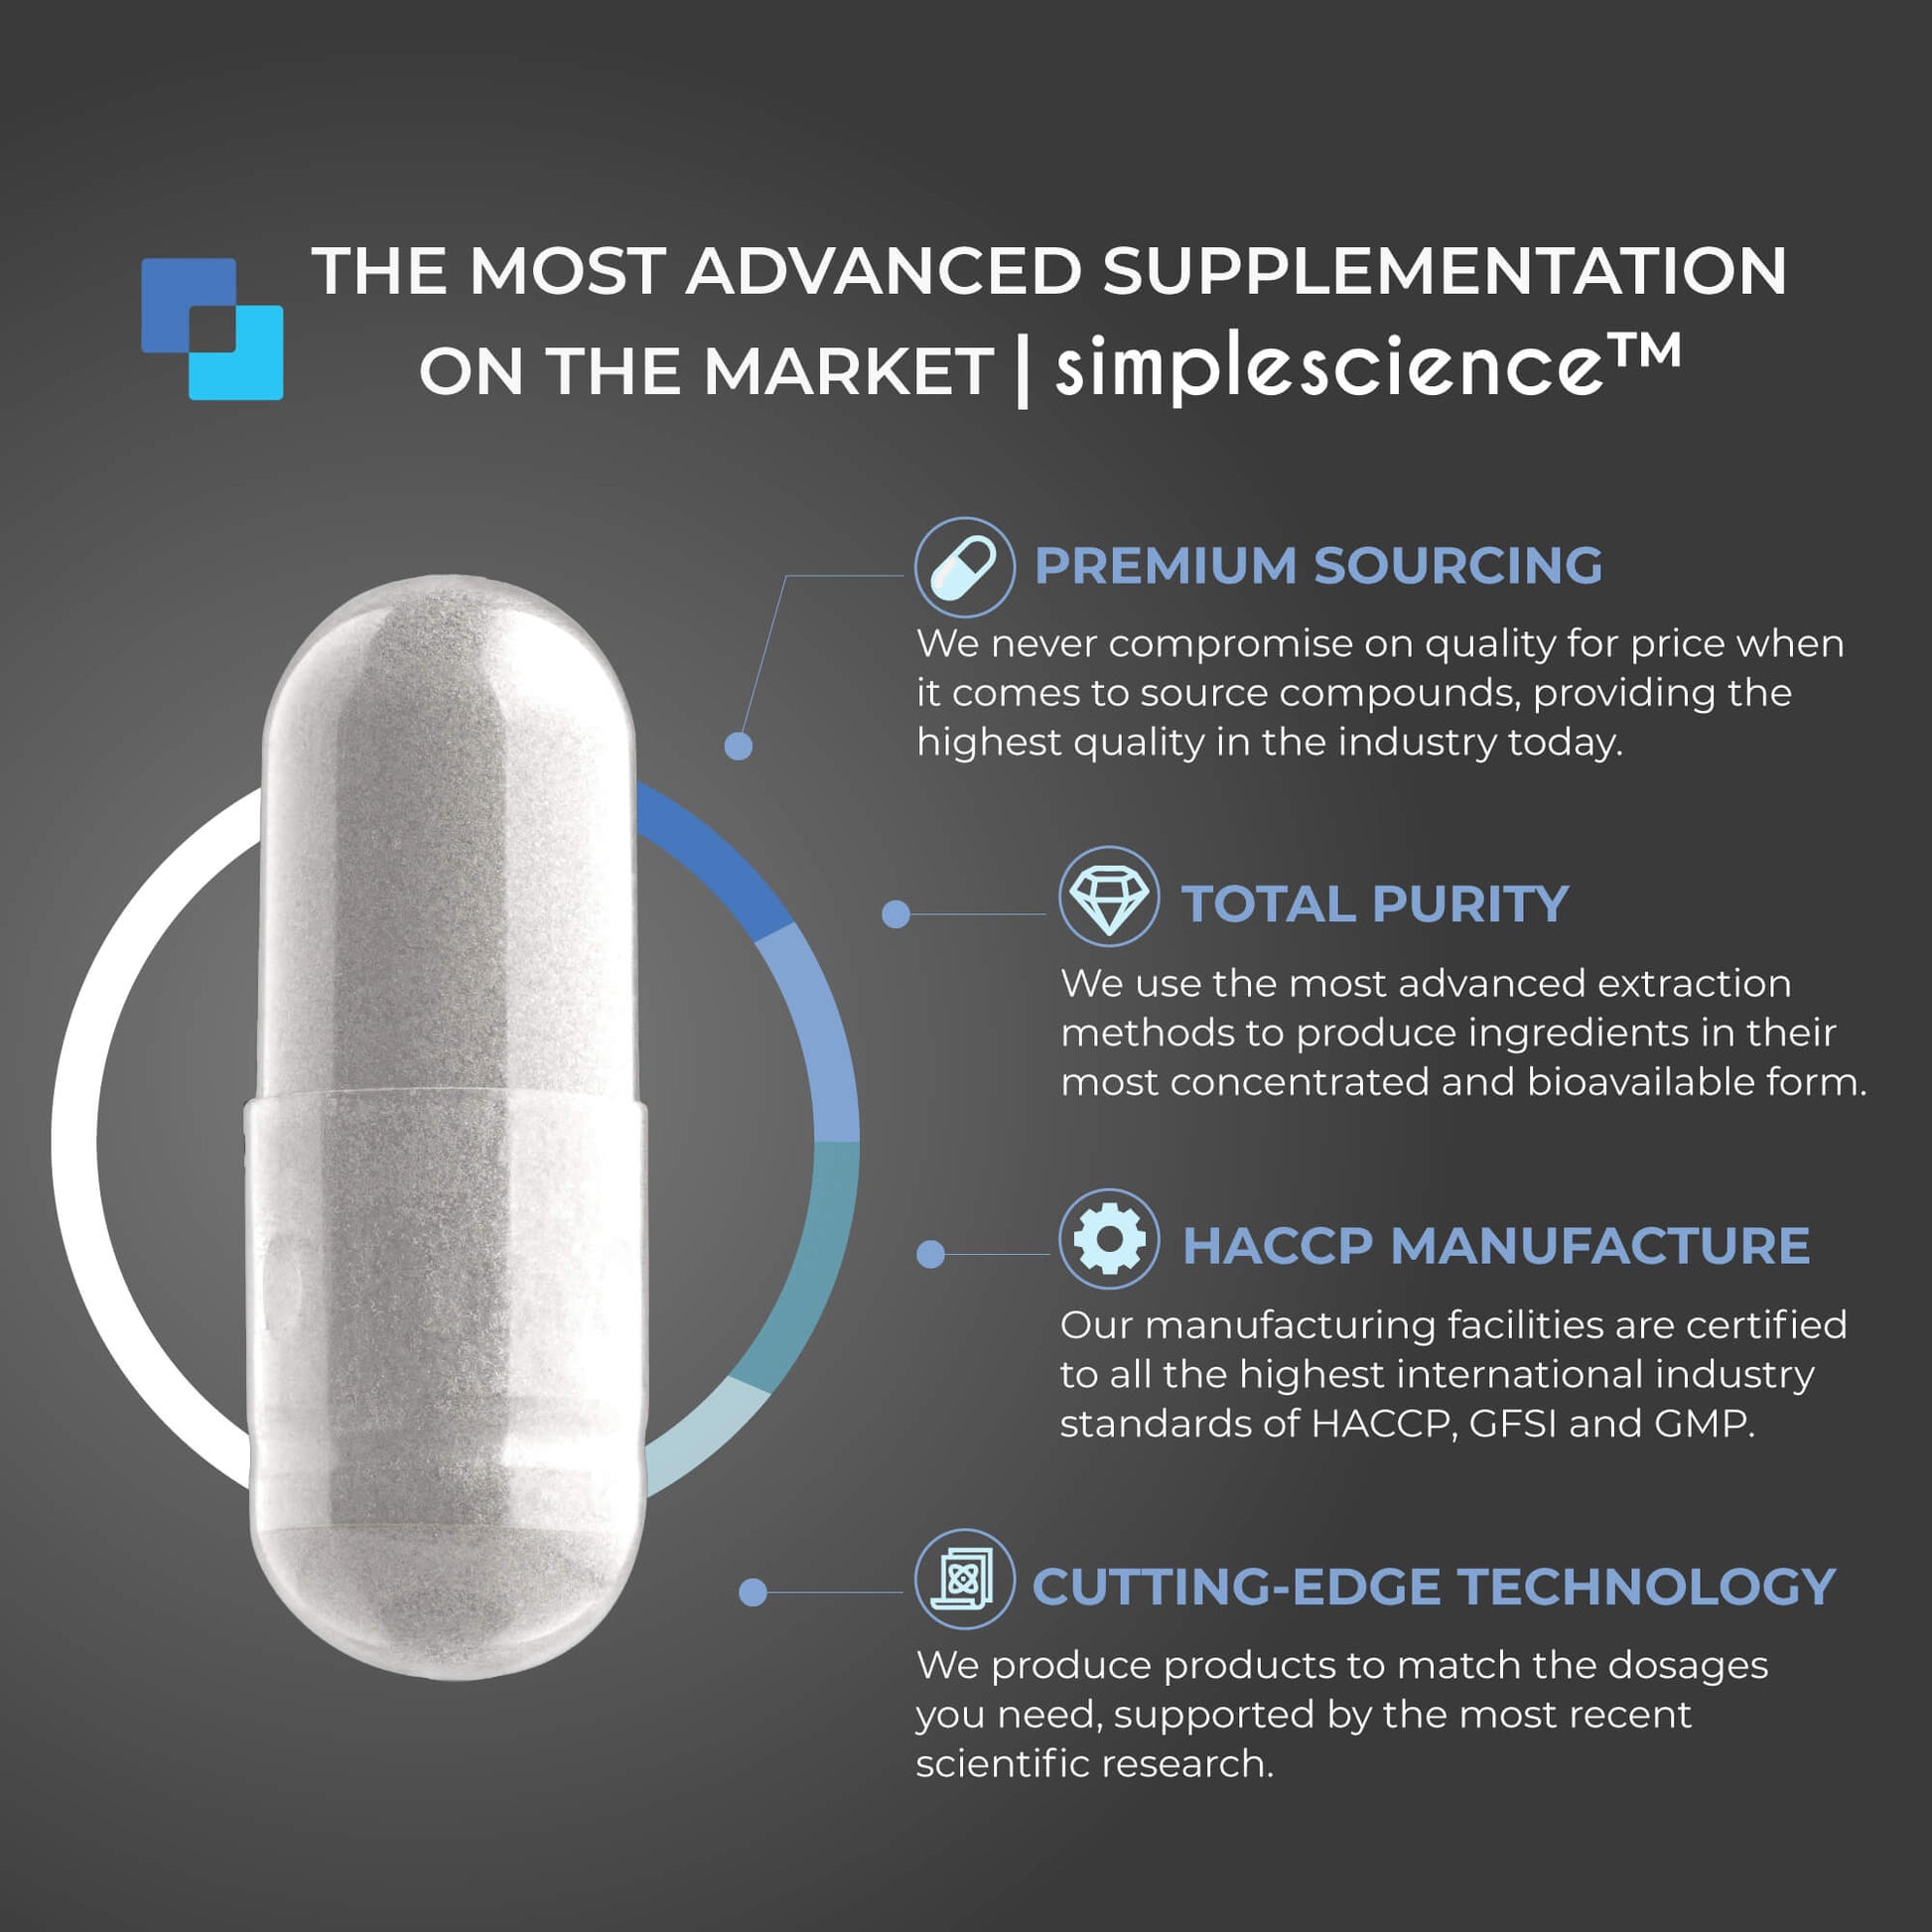 Simplescience offers the most advanced supplementation on the market, including premium sourcing, HACCP manufacture, GMP and GFSI standards, and cutting edge research